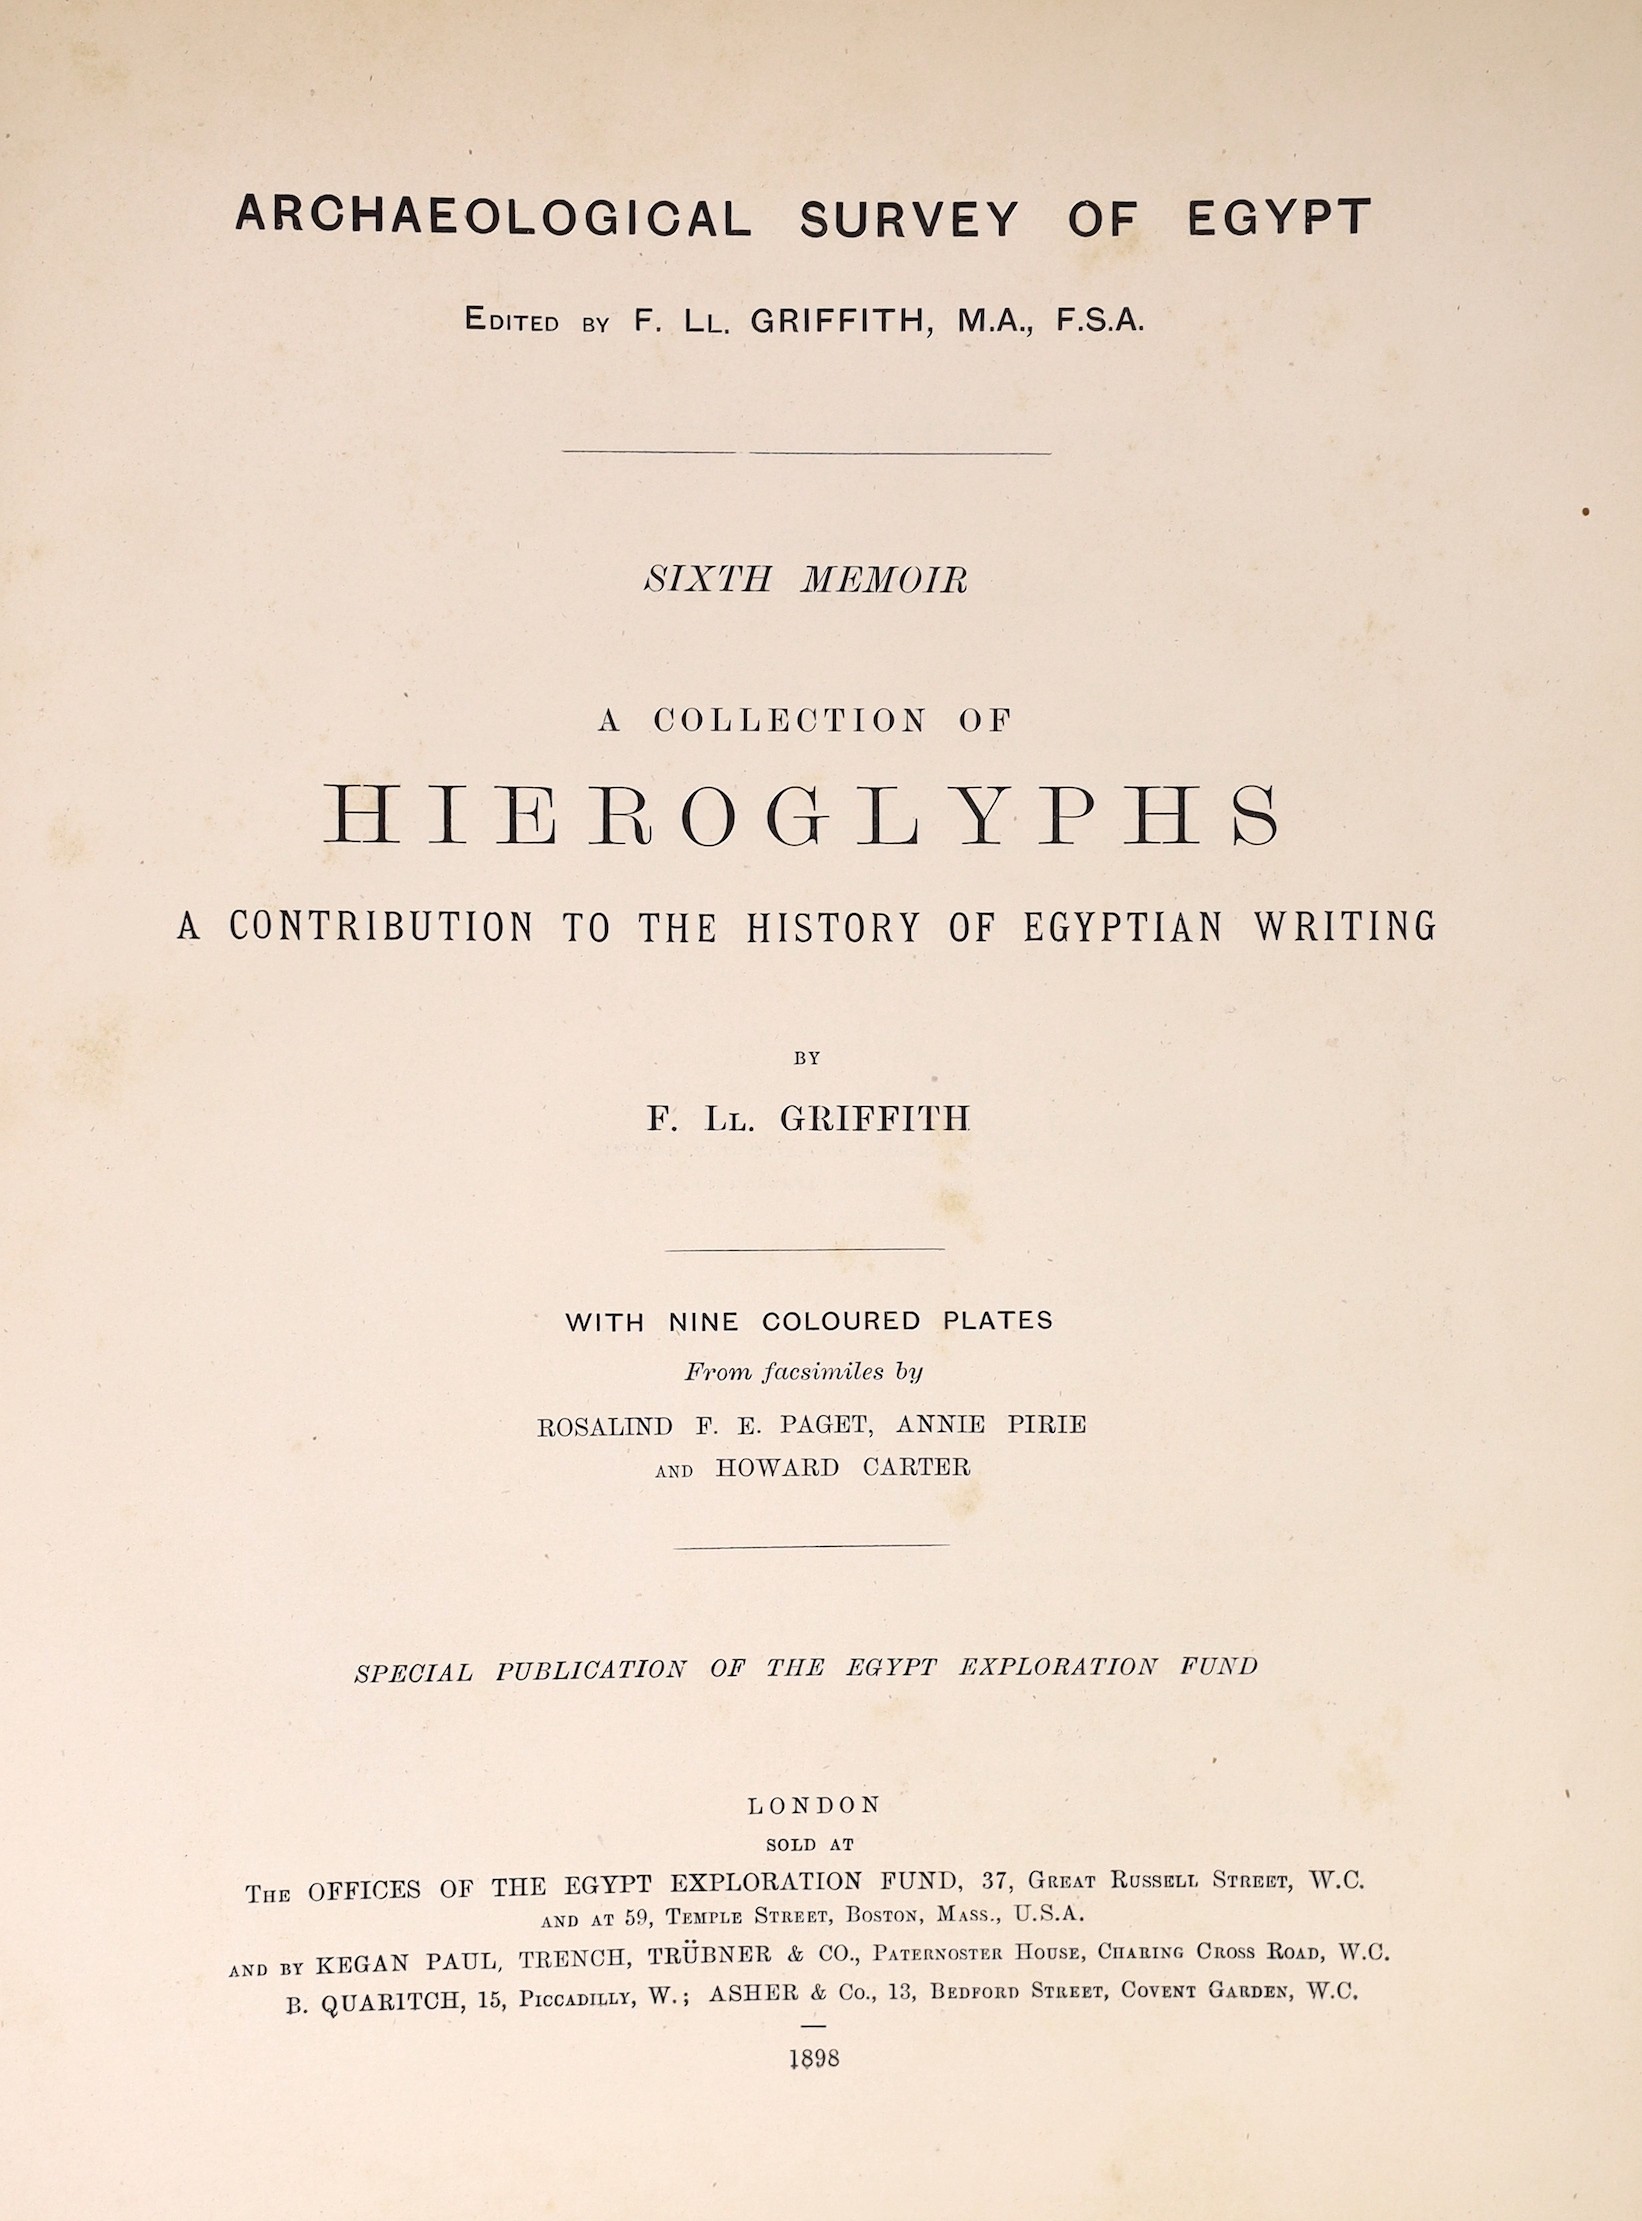 Archaeological Survey of Egypt - Sixth Memoir: A collection of Hieroglyphs, by F.Llewellyn Griffith. 9 coloured plates; publisher's cloth-backed printed boards, 4to. 1898; Archaeological Survey of Egypt - Eighth Memoir: